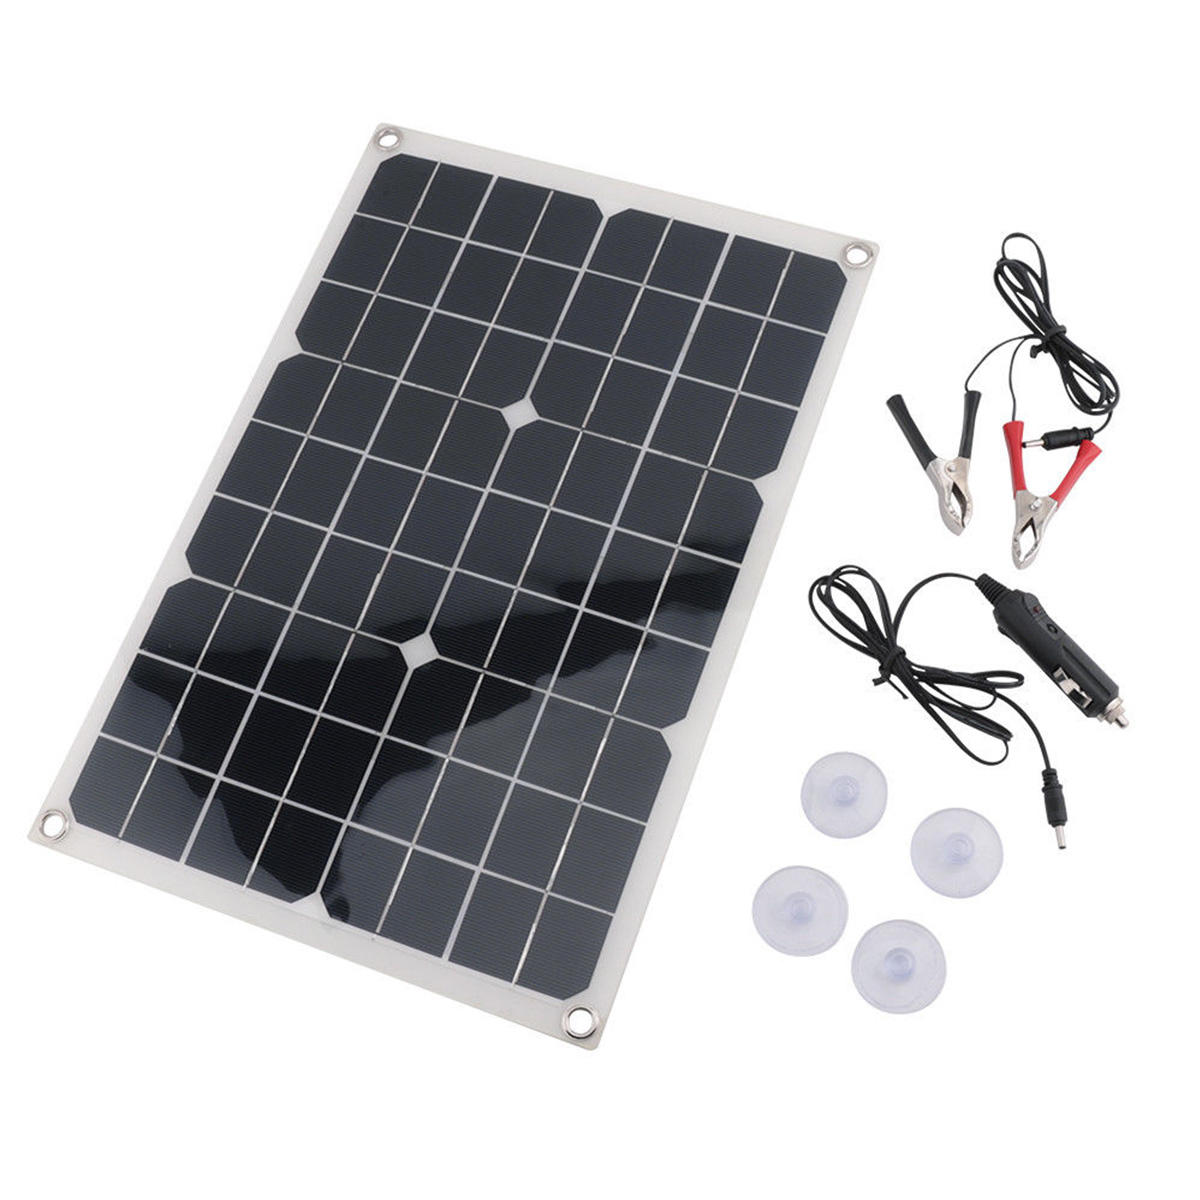 20W 18V Monocrystalline Silicon Solar Panel wth Single USB Output & Cables for Outdoor Cycling/Hiking/Camping